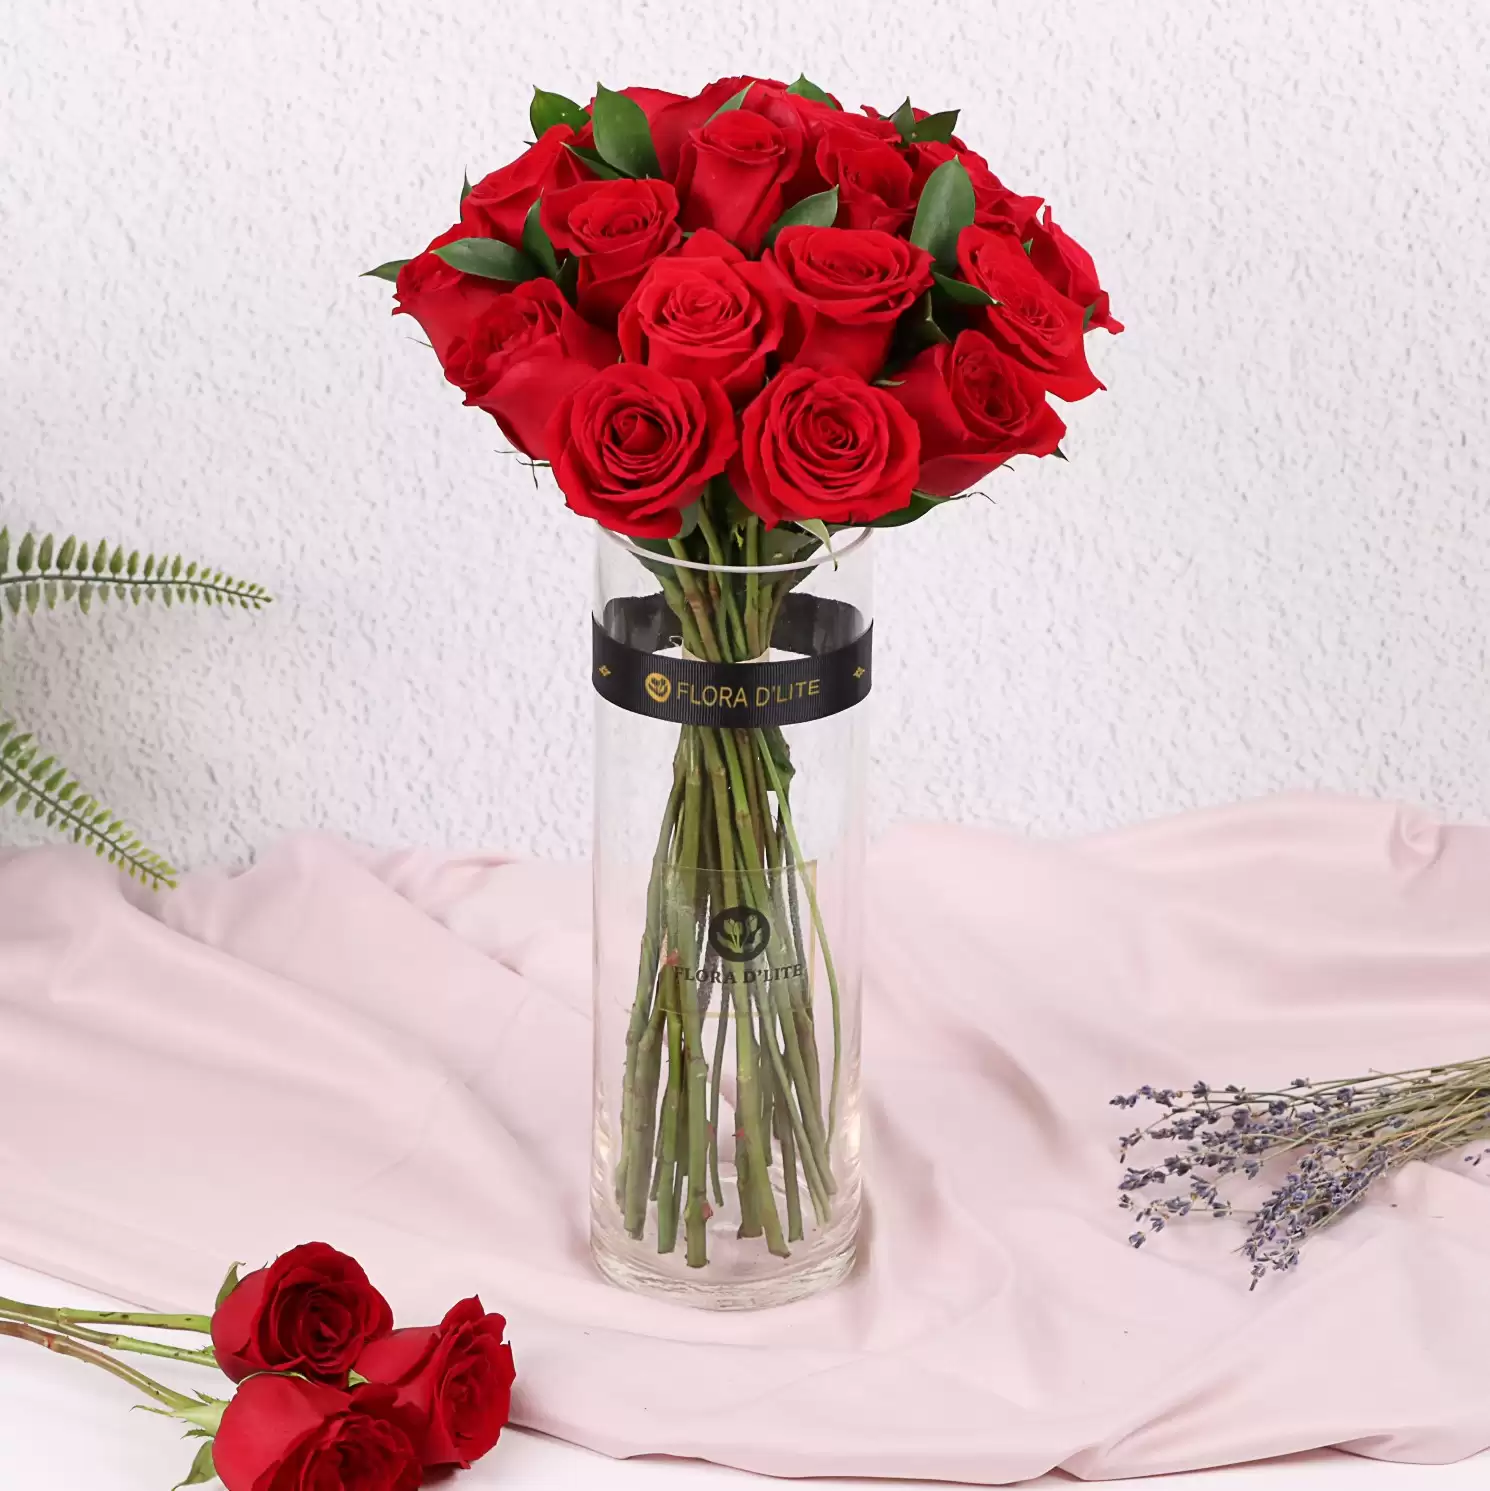 Gorgeous Roses | Red Roses Delivery In Bahrain - Flora D'lite